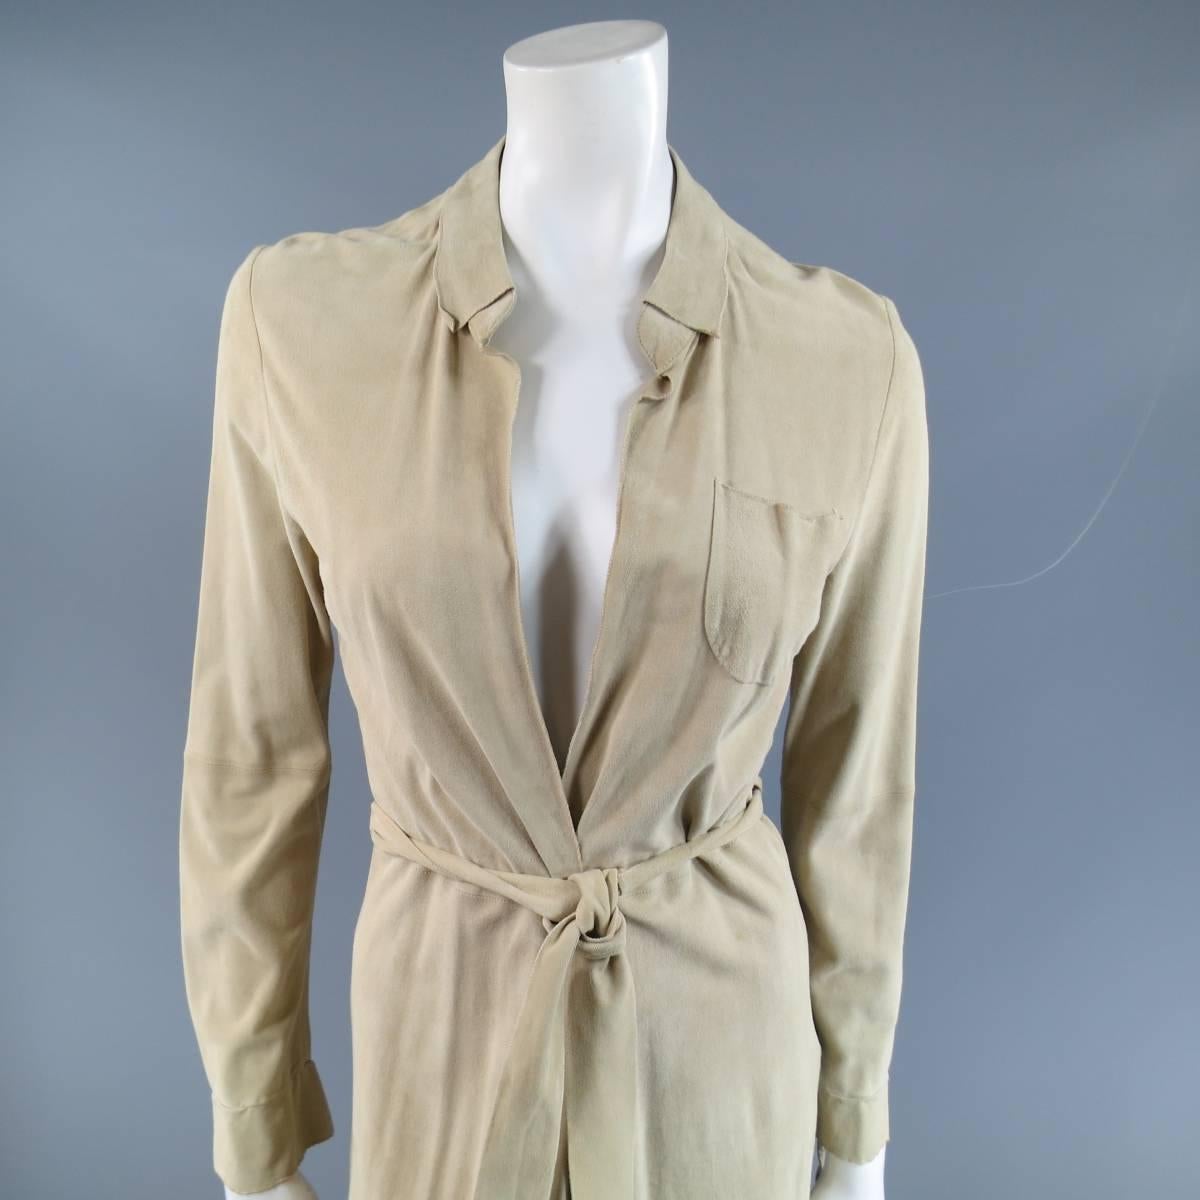 This lovely summer coat by GIORGIO ARMANI comes in a light weight beige suede and features a pointed collar, long sleeves with tie detail. patch pocket, multi slit hem, and open front with tie closure belt. Made in Italy
 
Good Pre-Owned